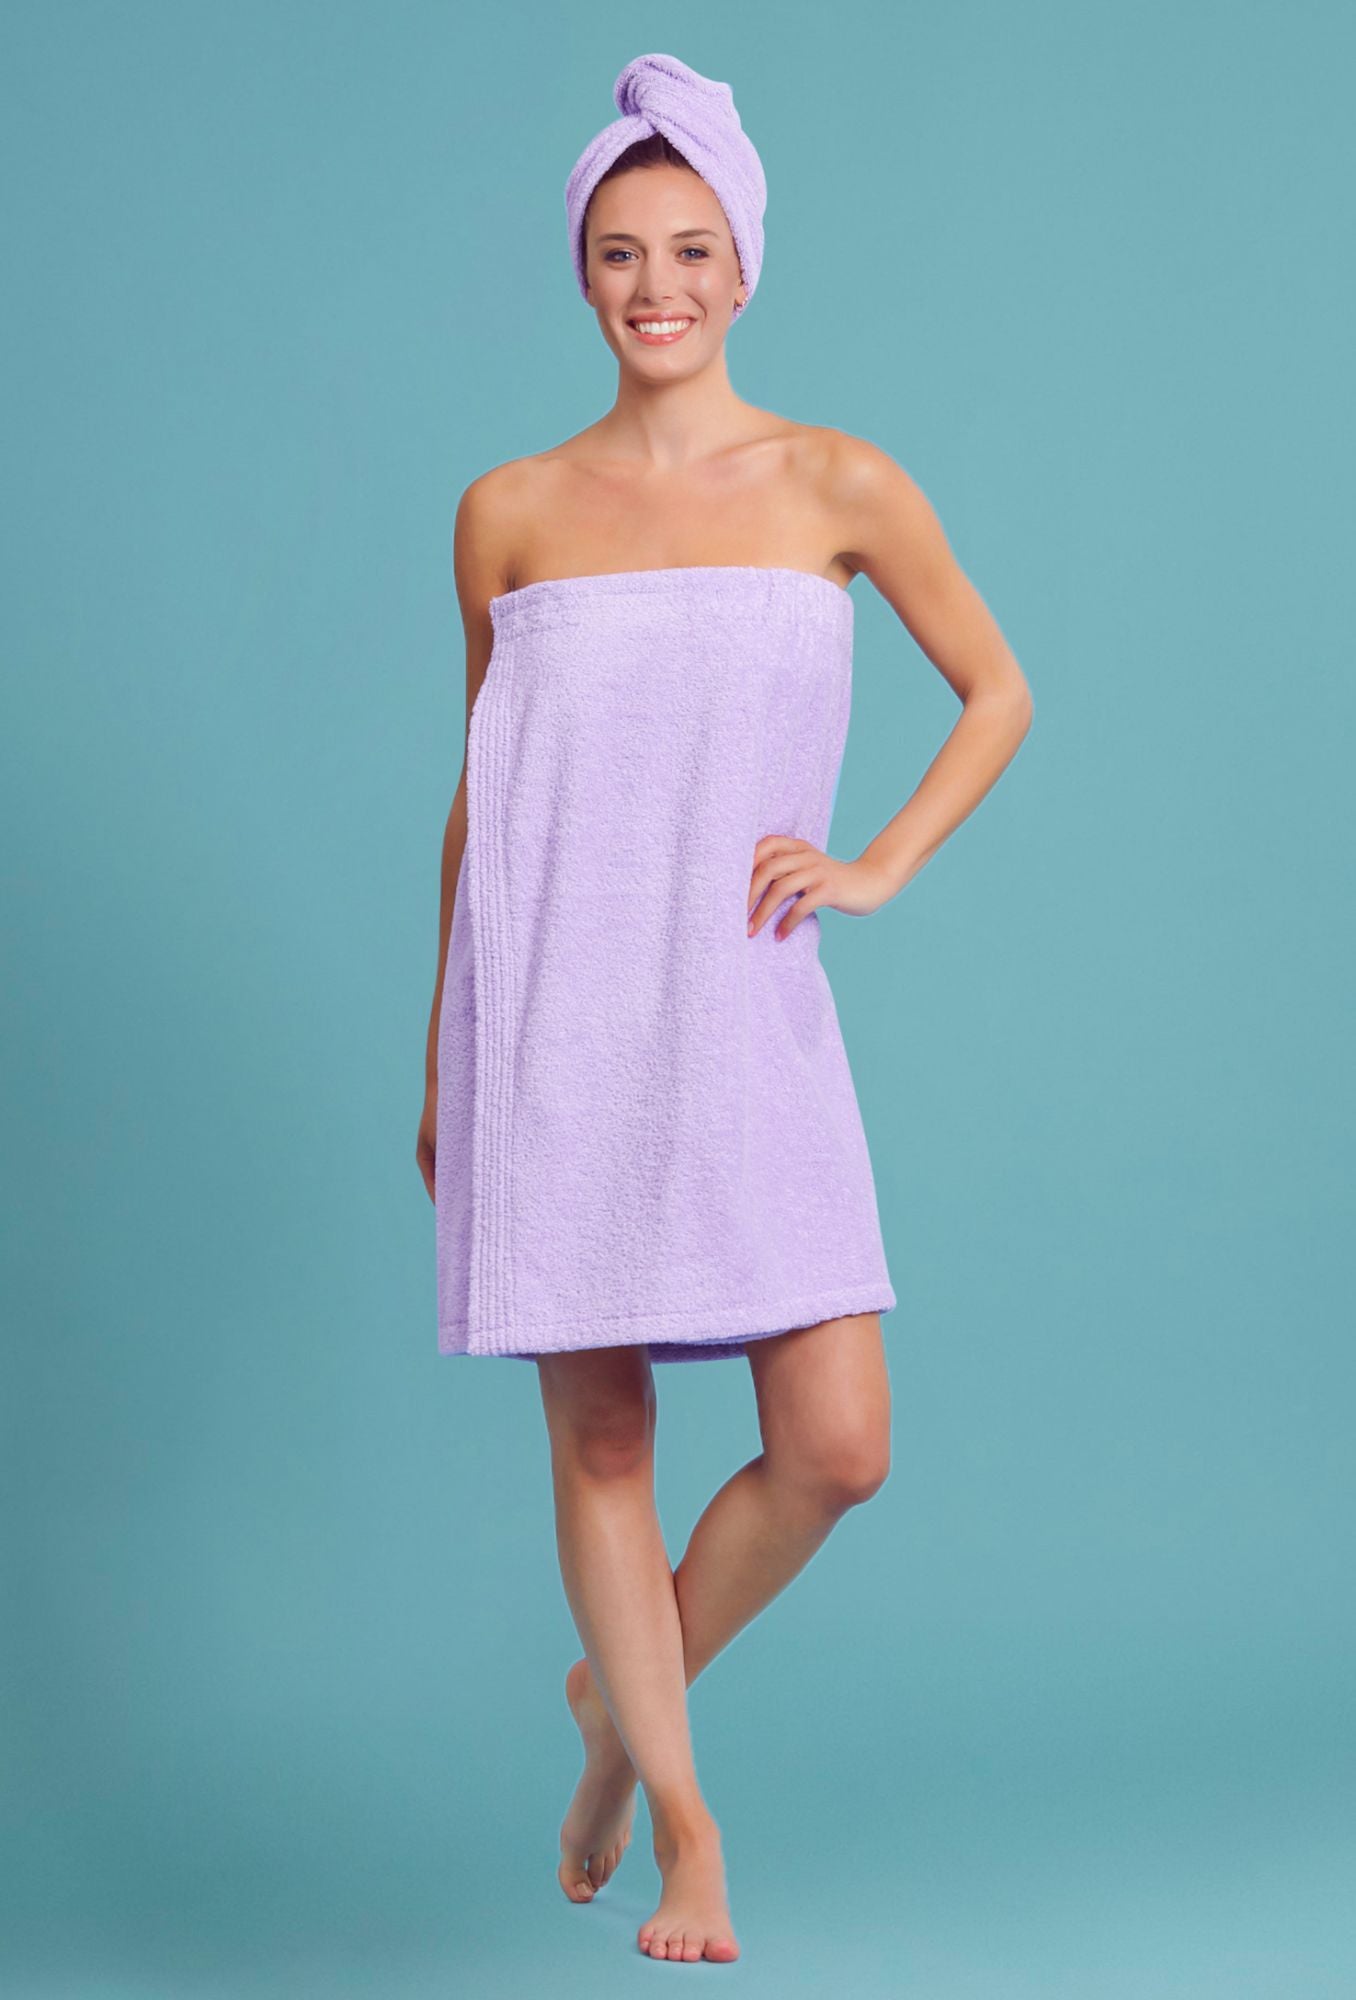 Authentic Turkish Cotton Terry Grey Spa and Shower Towel Wrap - On Sale -  Bed Bath & Beyond - 28303229